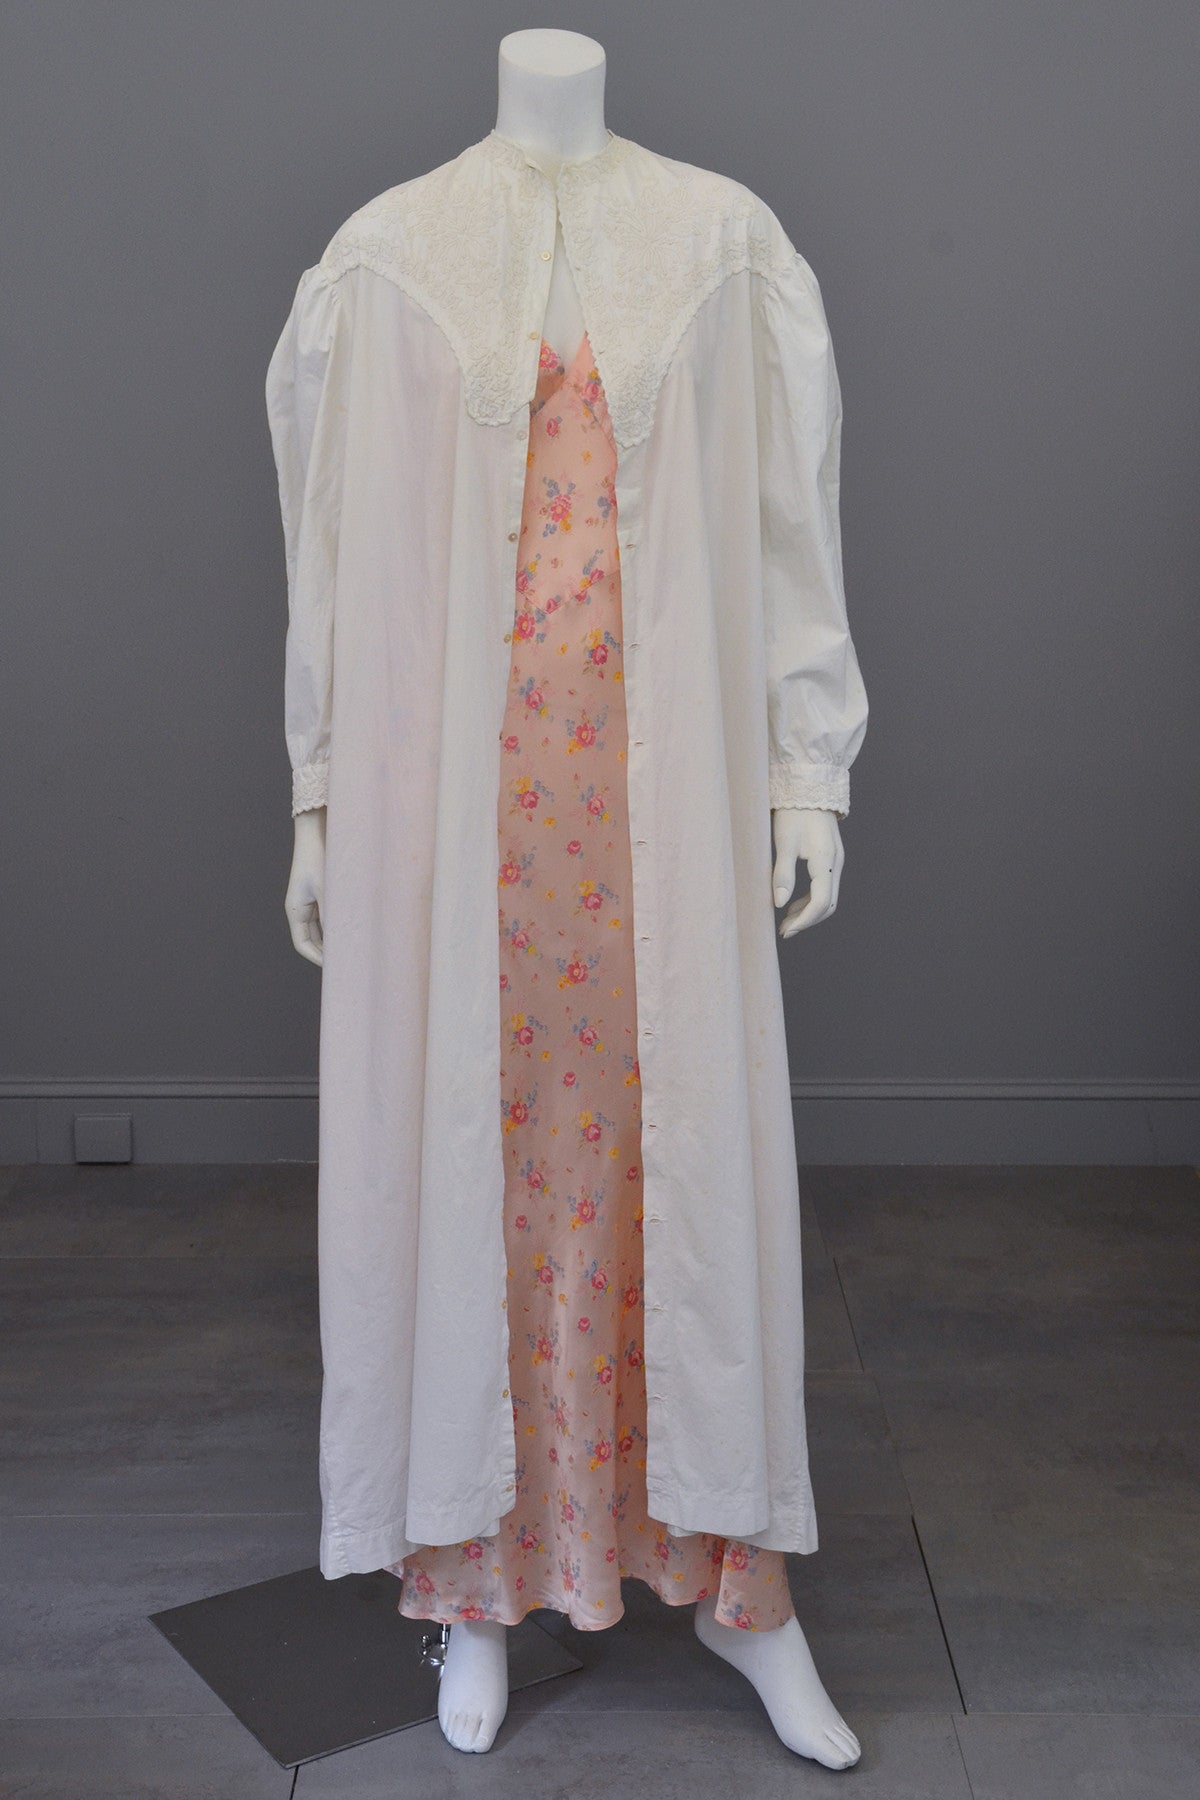 Edwardian Victorian Soutache Embroidered White Cotton 'Lab' Coat Robe Duster